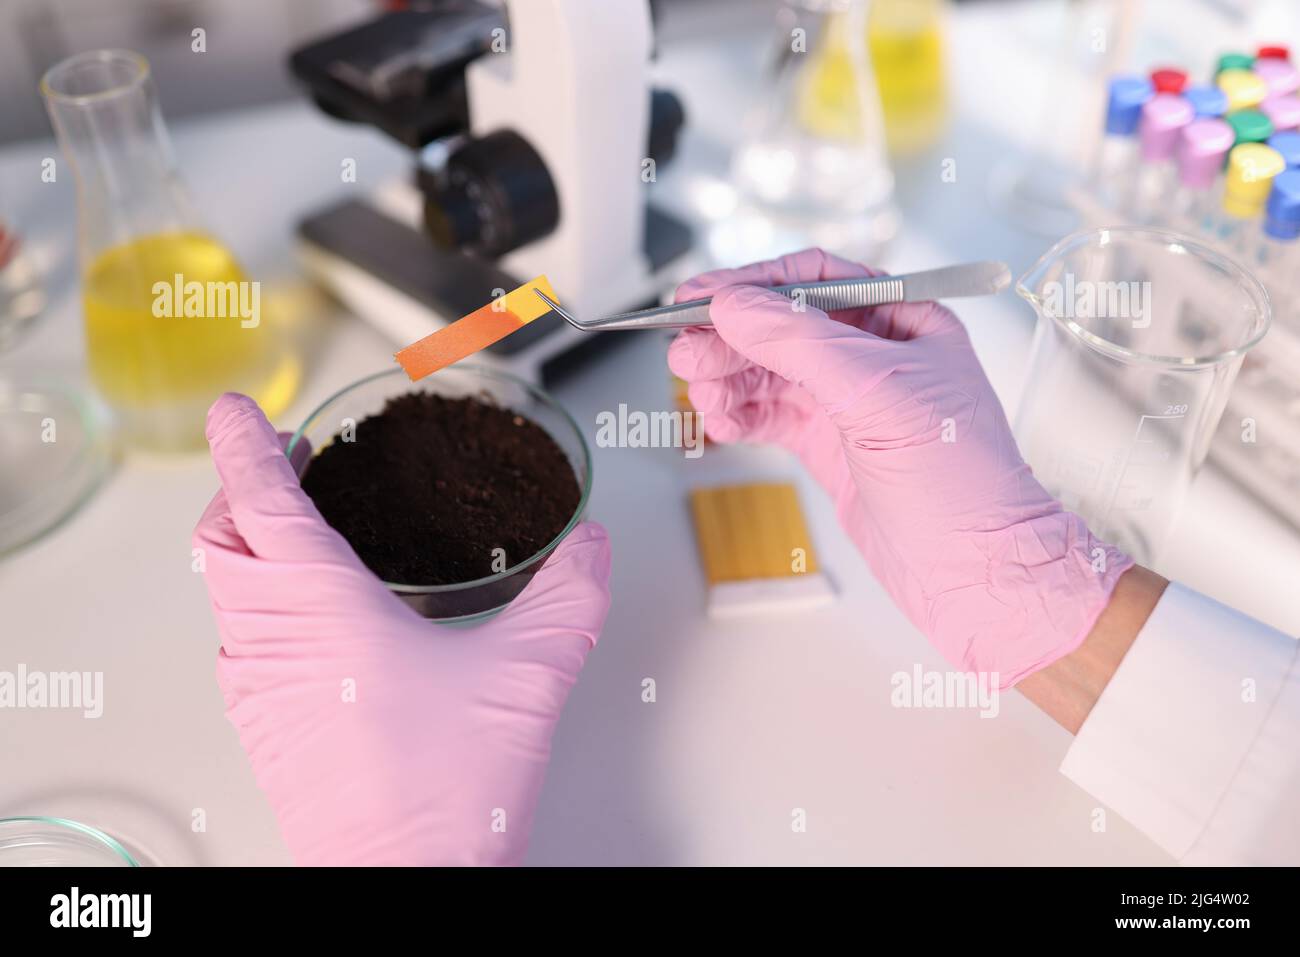 Laboratory analysis of soil. Scientist measures pH of soil sample with litmus strips Stock Photo